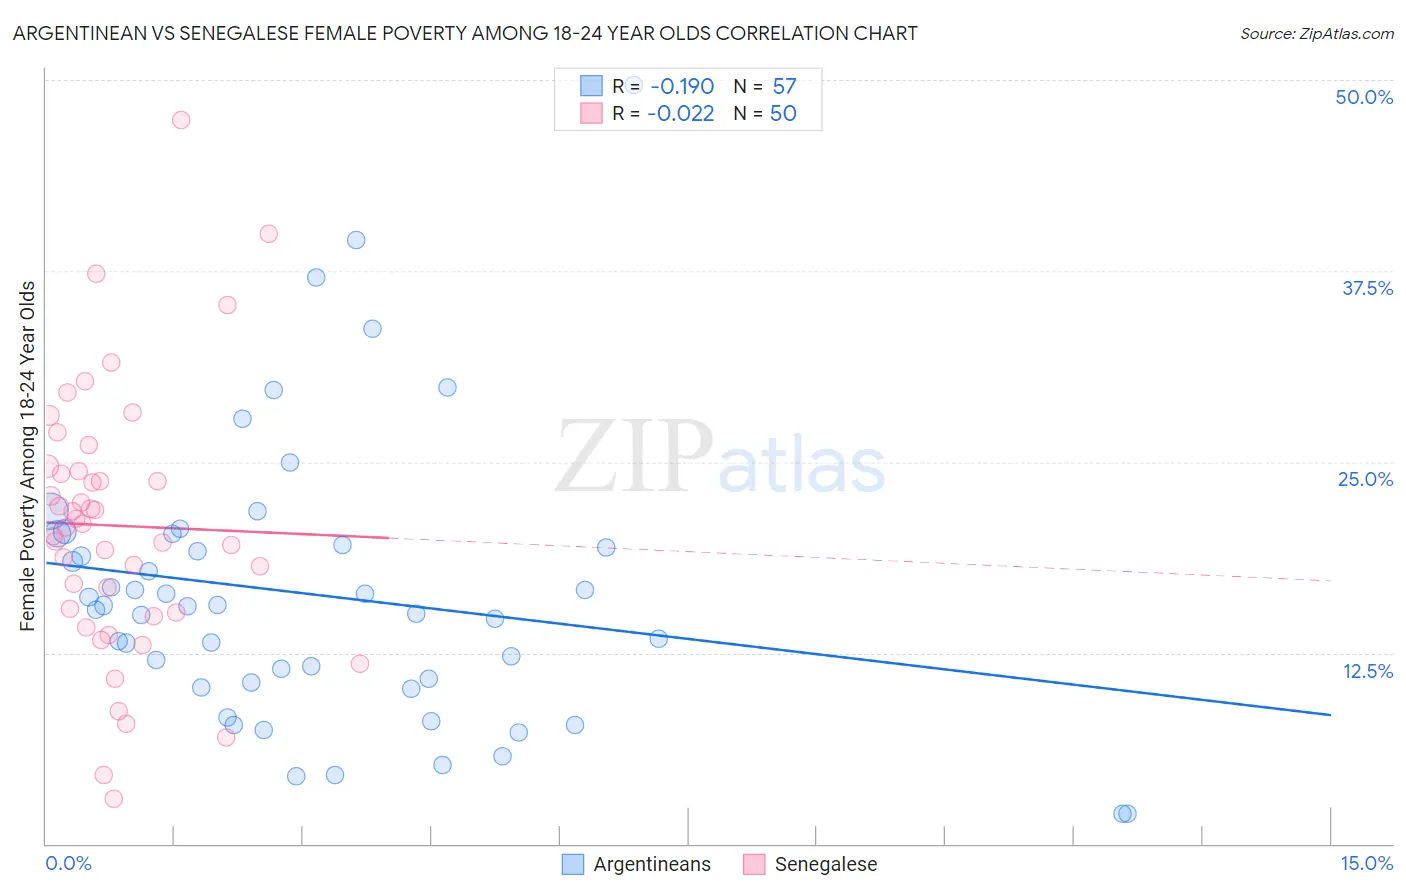 Argentinean vs Senegalese Female Poverty Among 18-24 Year Olds